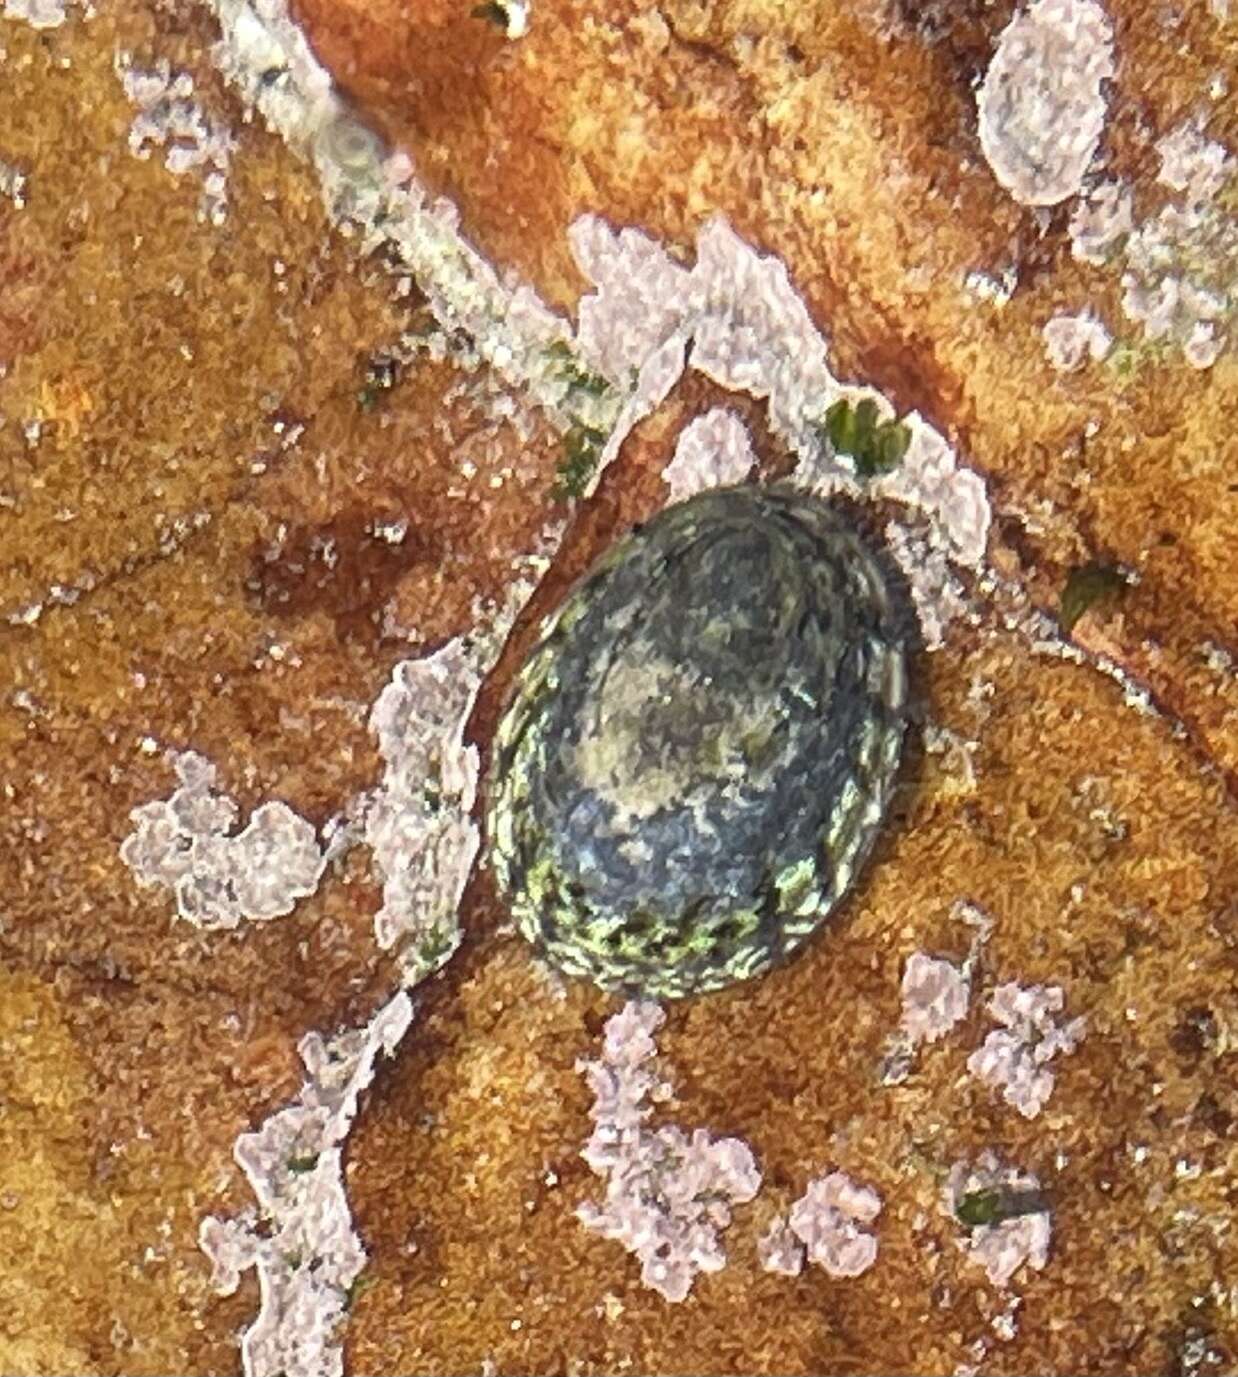 Image of rayed limpet